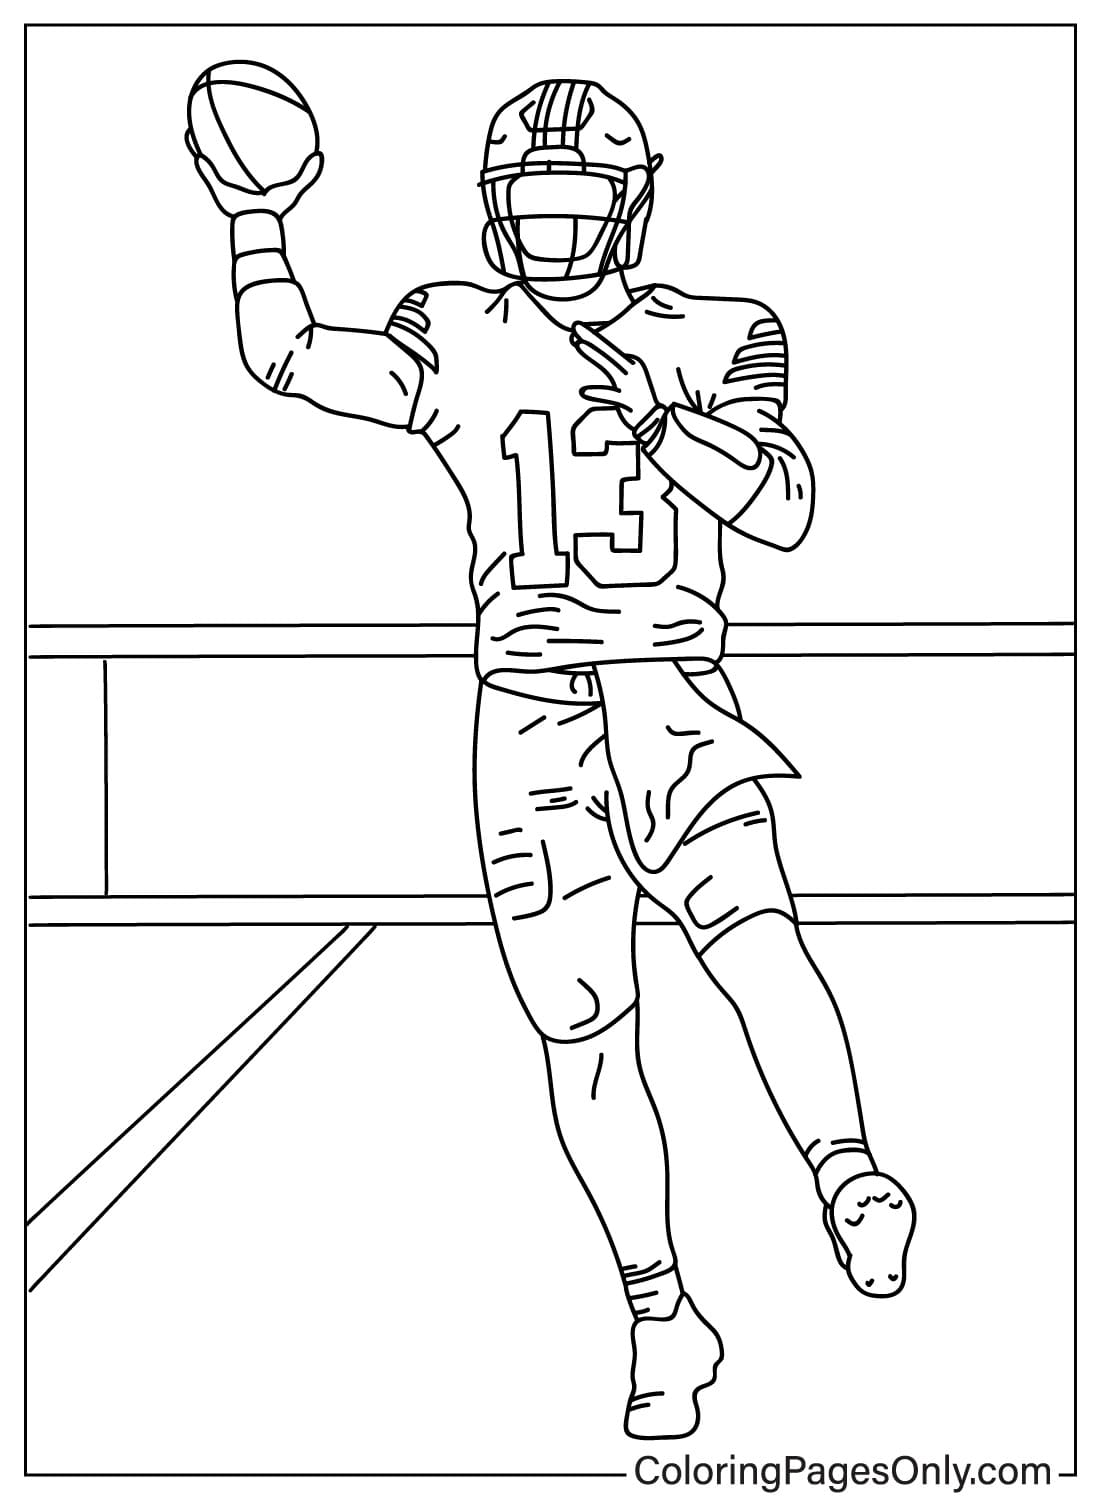 Brock Purdy Coloring Page Free from San Francisco 49ers